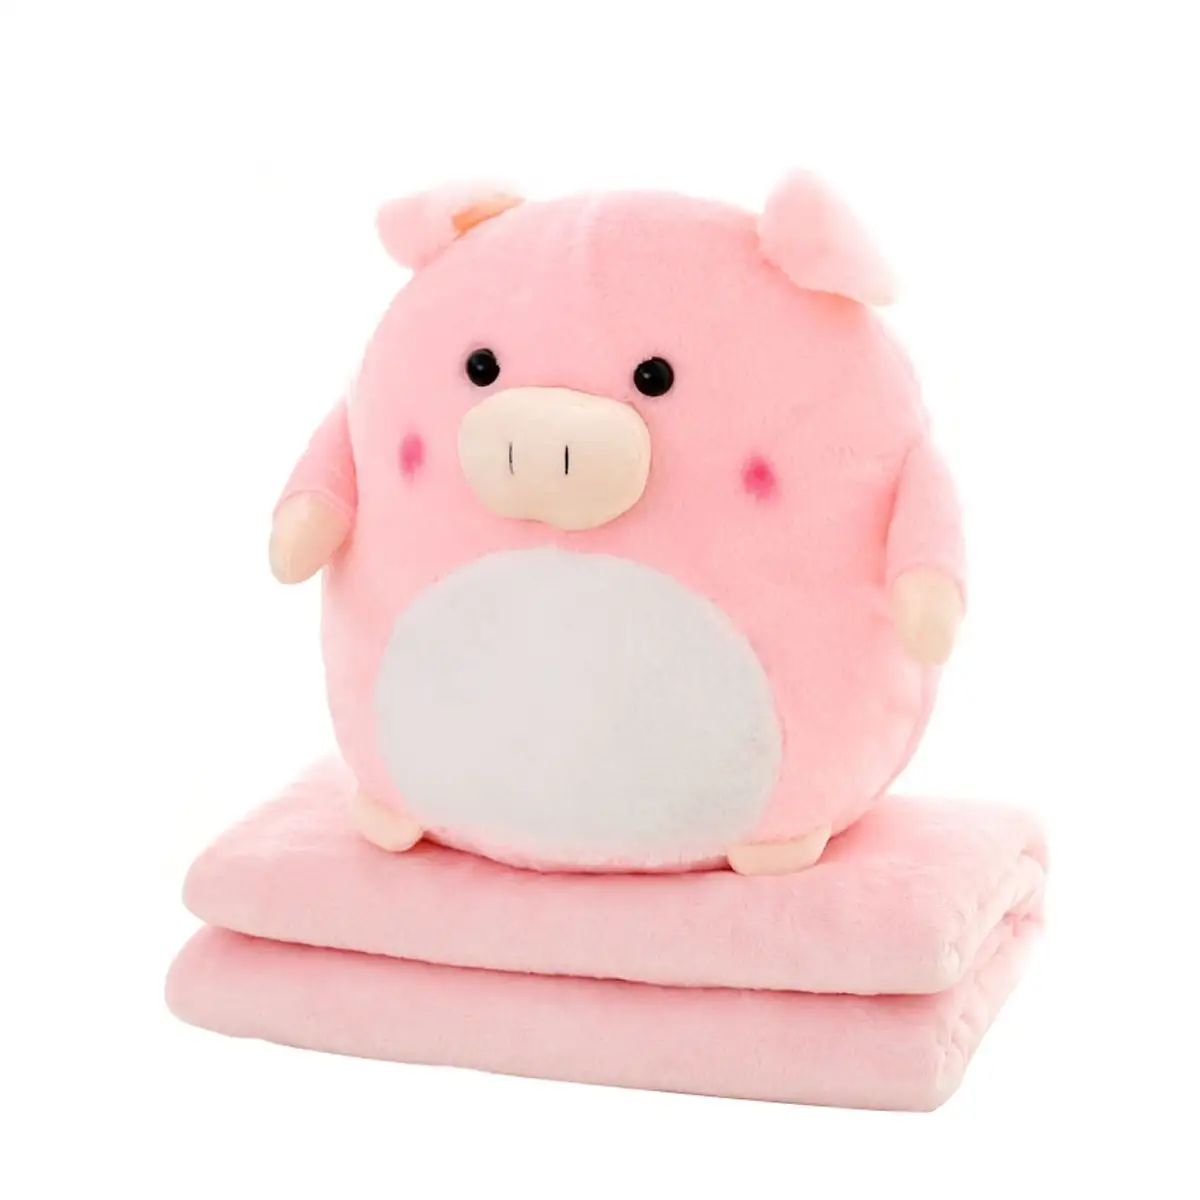 Cute Cartoon Stuffed Animal Soft Plush Pig Toy With Blanket 2 1でKids Pillow Blanket Toy Sets